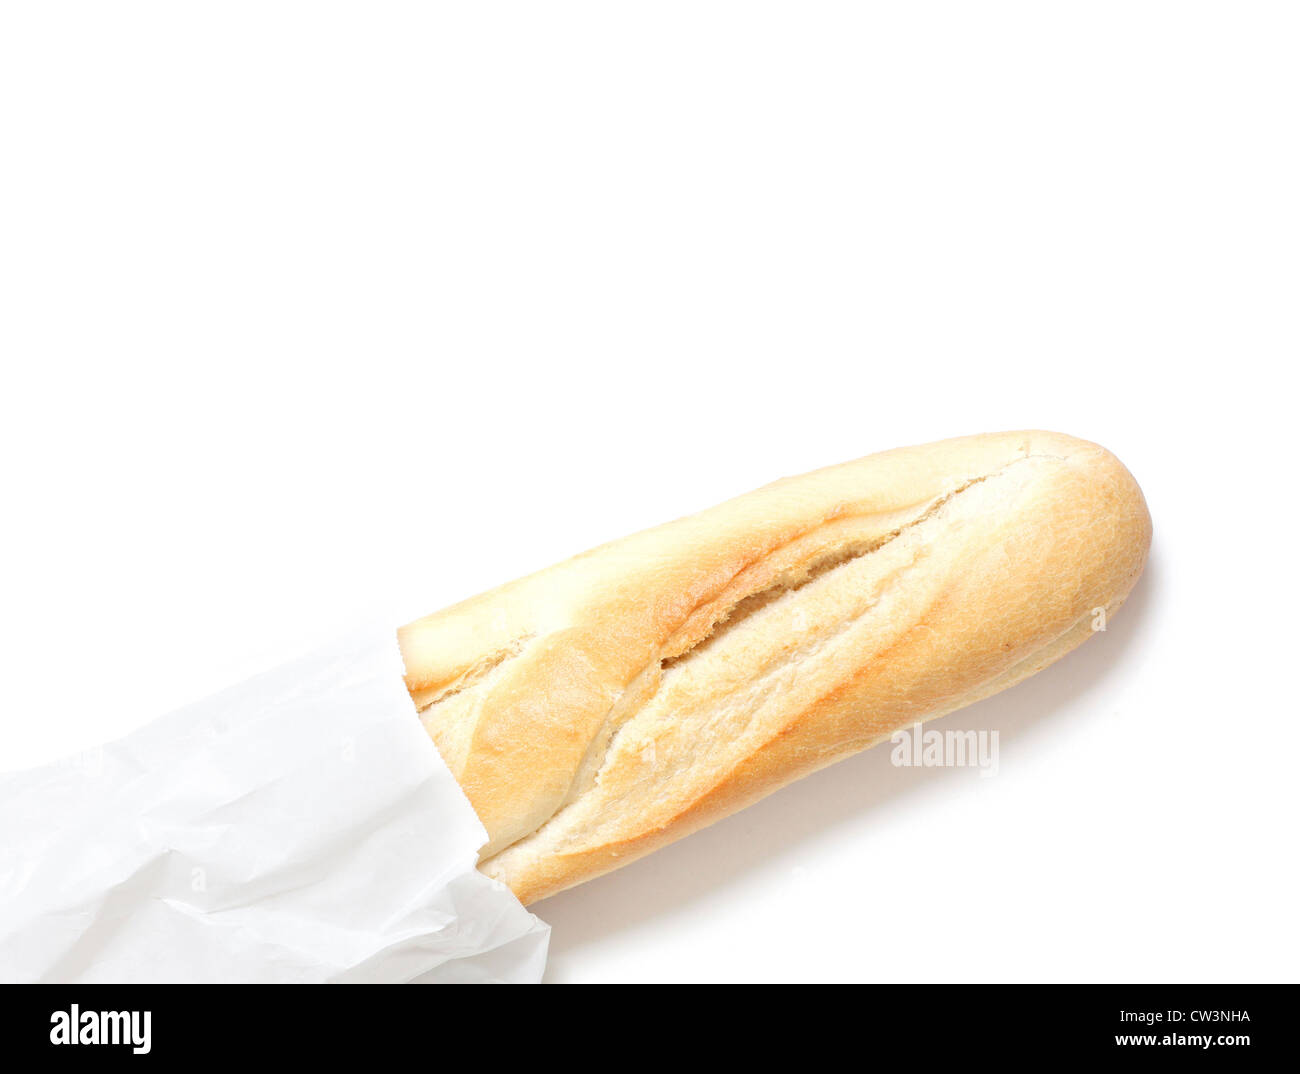 A French baguette in a bag Banque D'Images